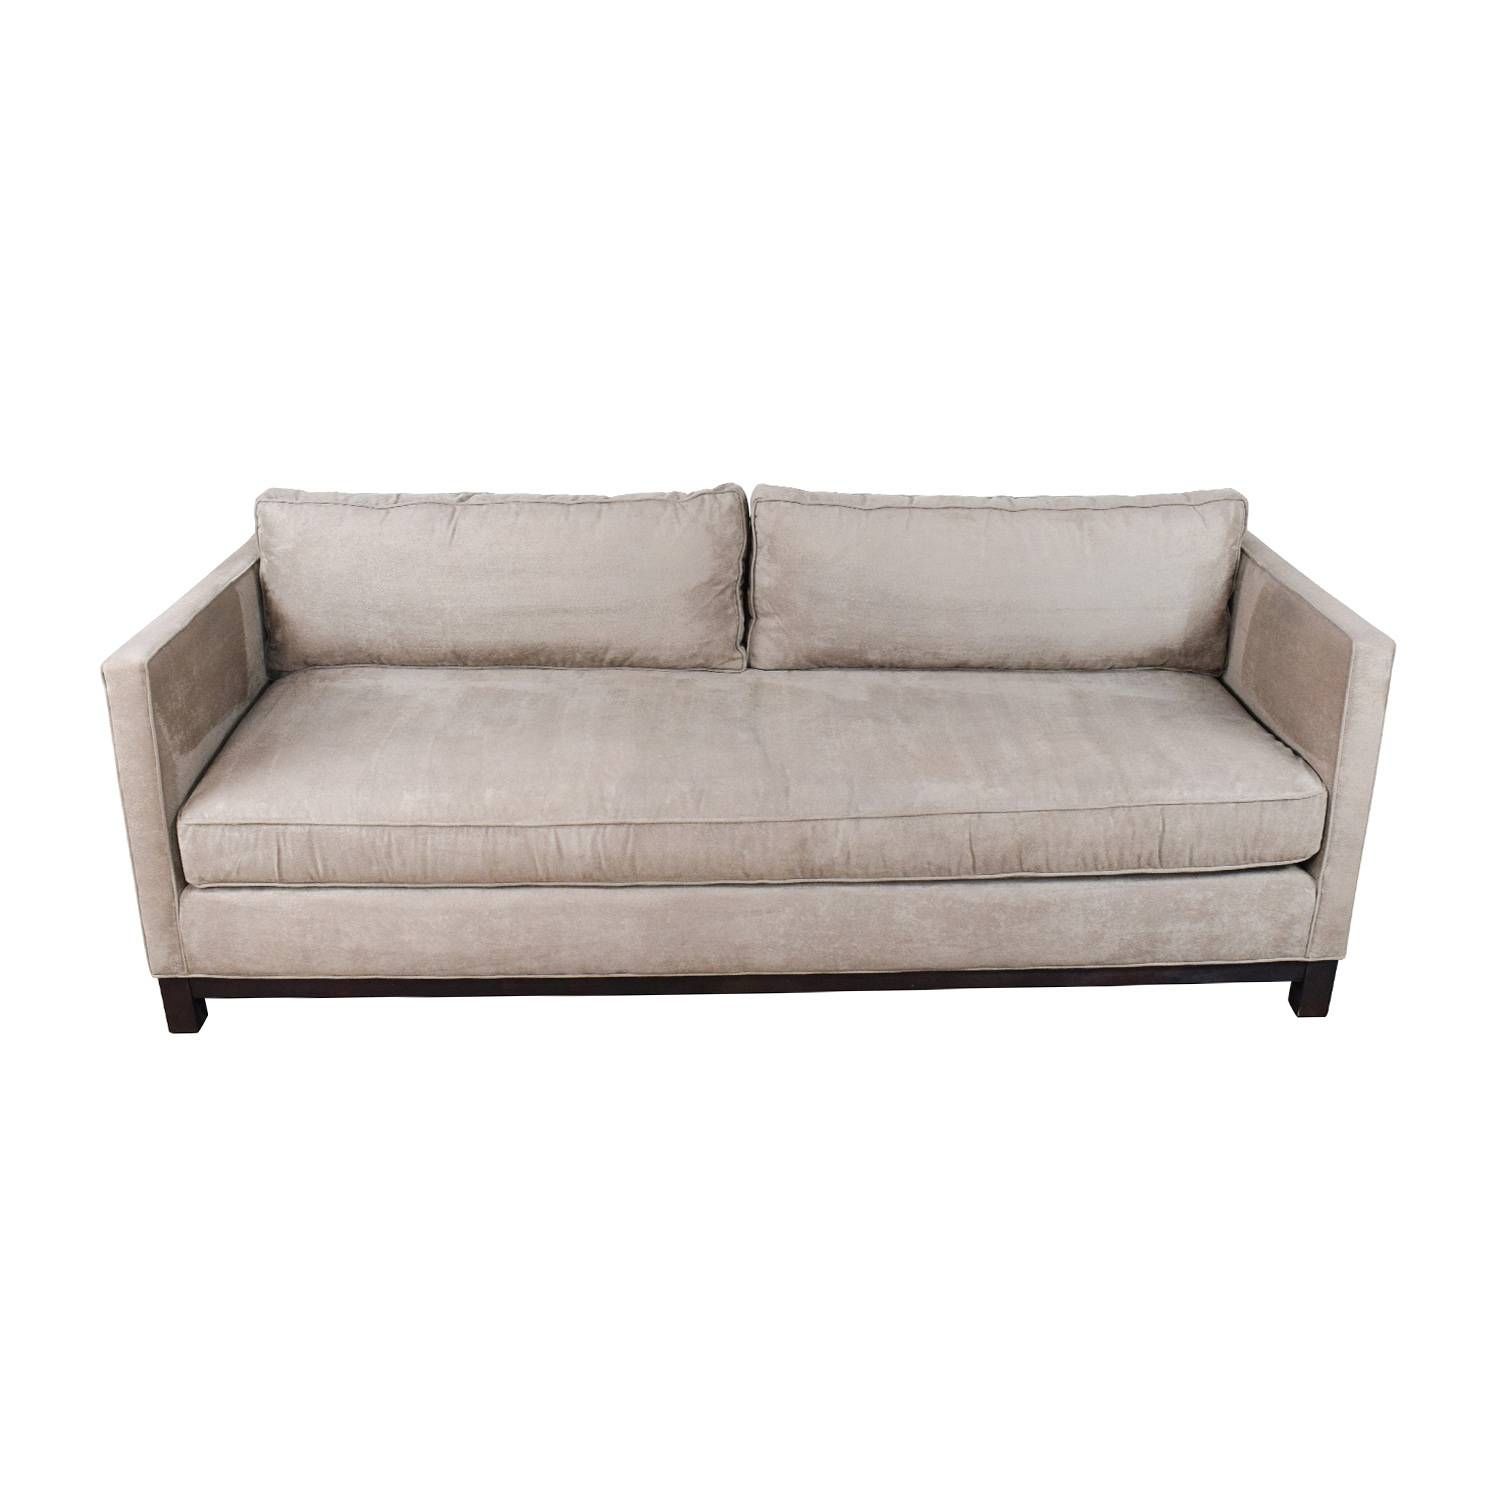 Furniture Home : Outstanding Mitchell Gold Clifton Sectional Sofa Inside Mitchell Gold Sofa Slipcovers (View 14 of 26)